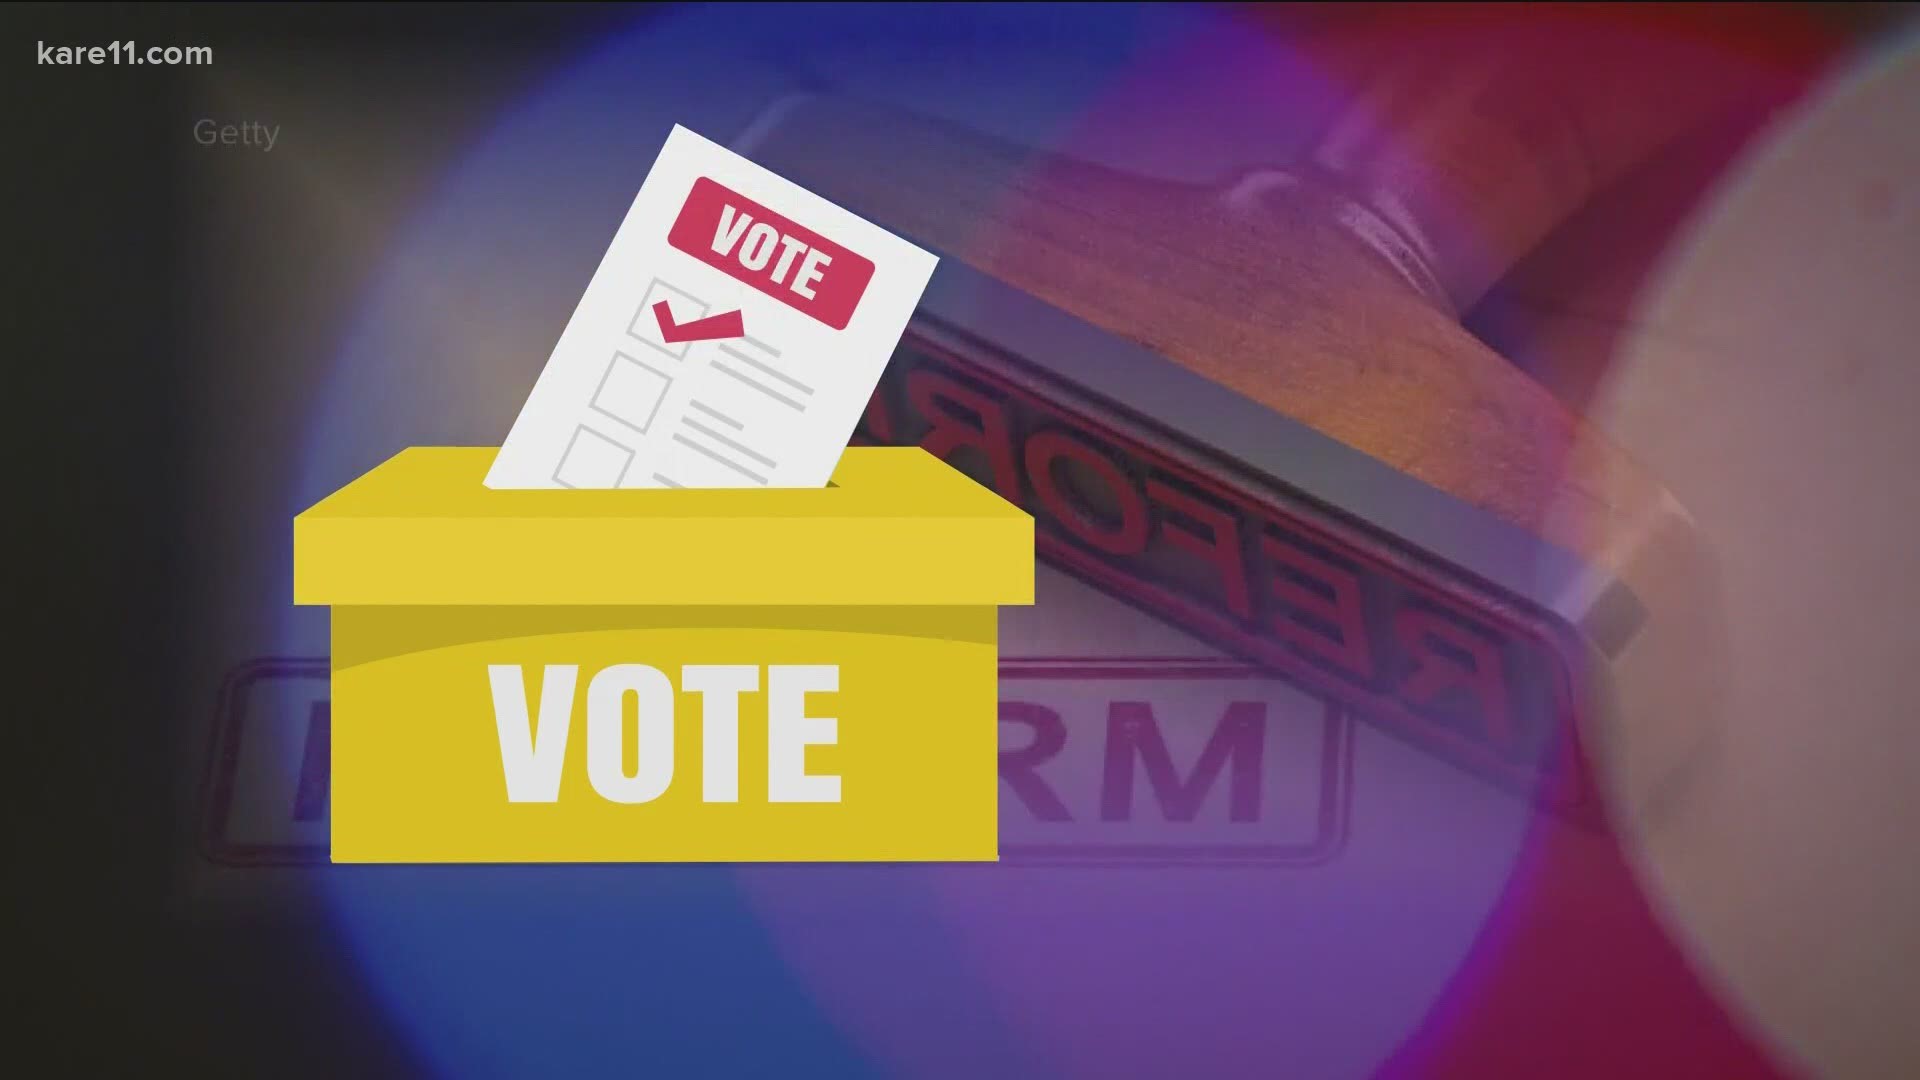 Voters will be given the opportunity to vote either "yes" or "no" on the ballot question